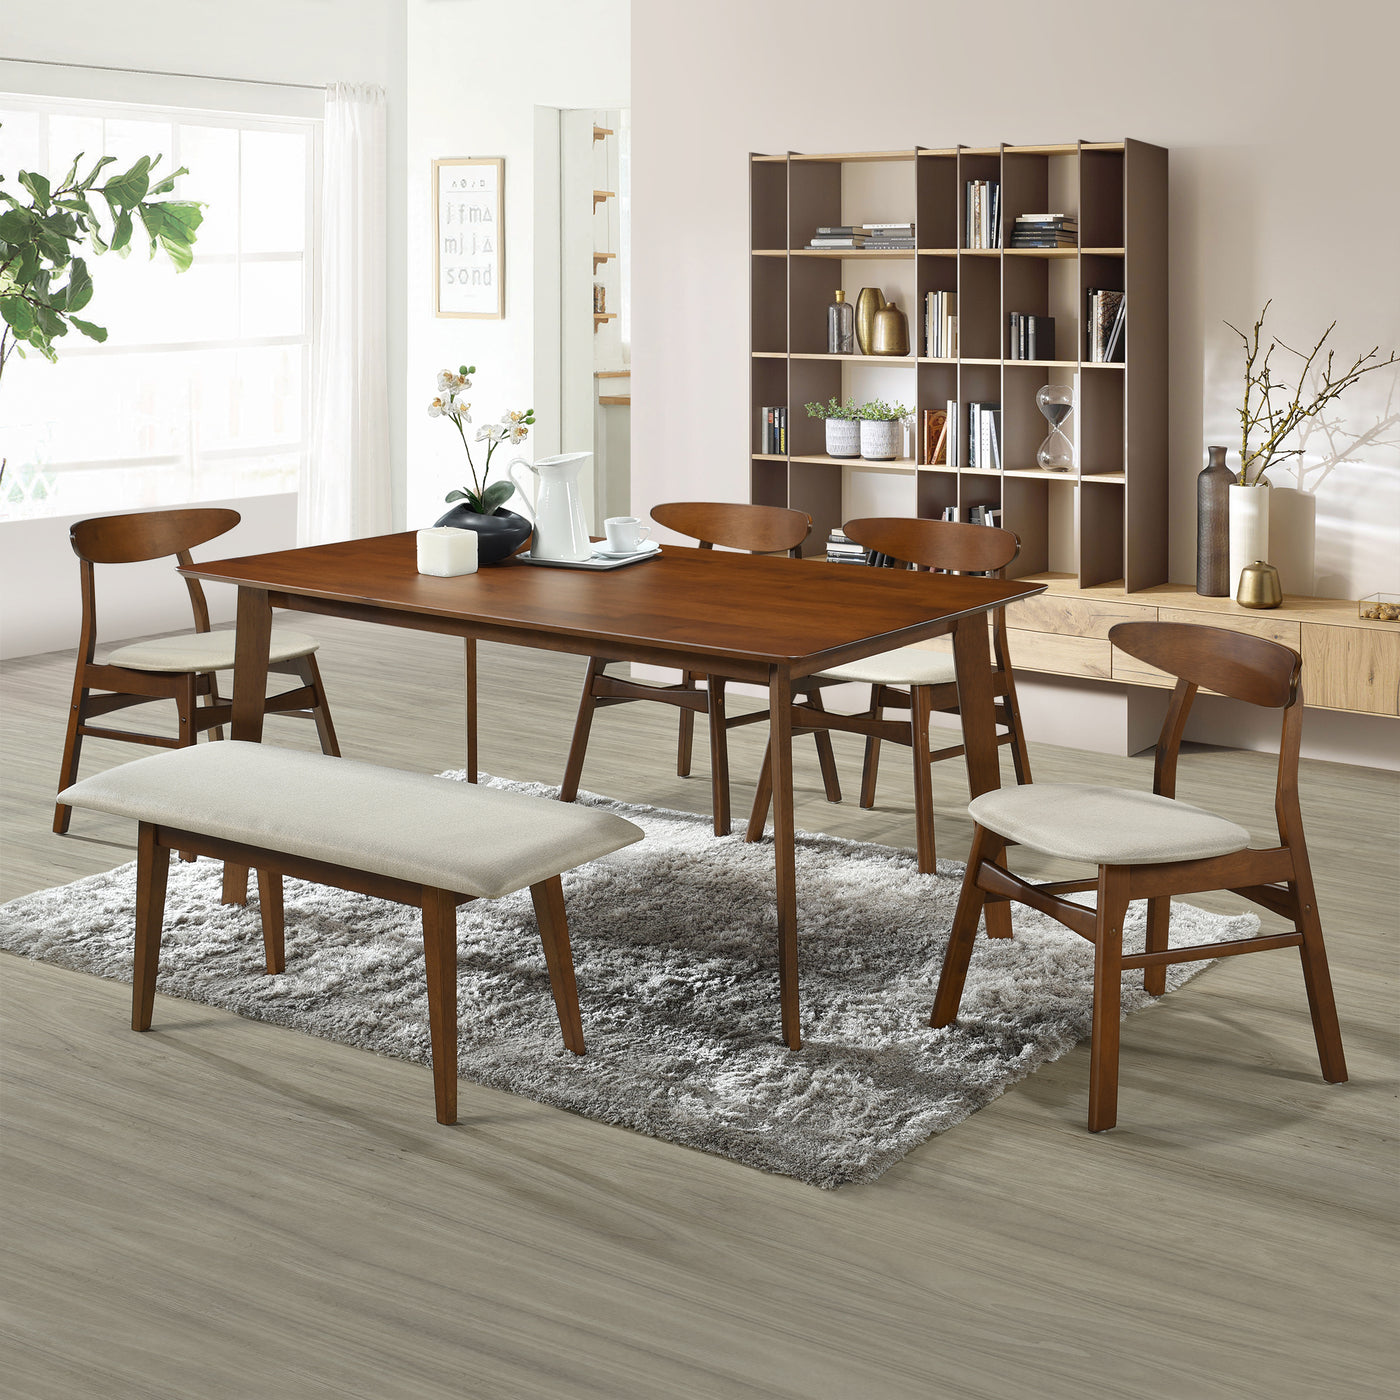 Lalia 6-Piece Solid Wood Upholstered Chair and Dining Table Bench Dining Set